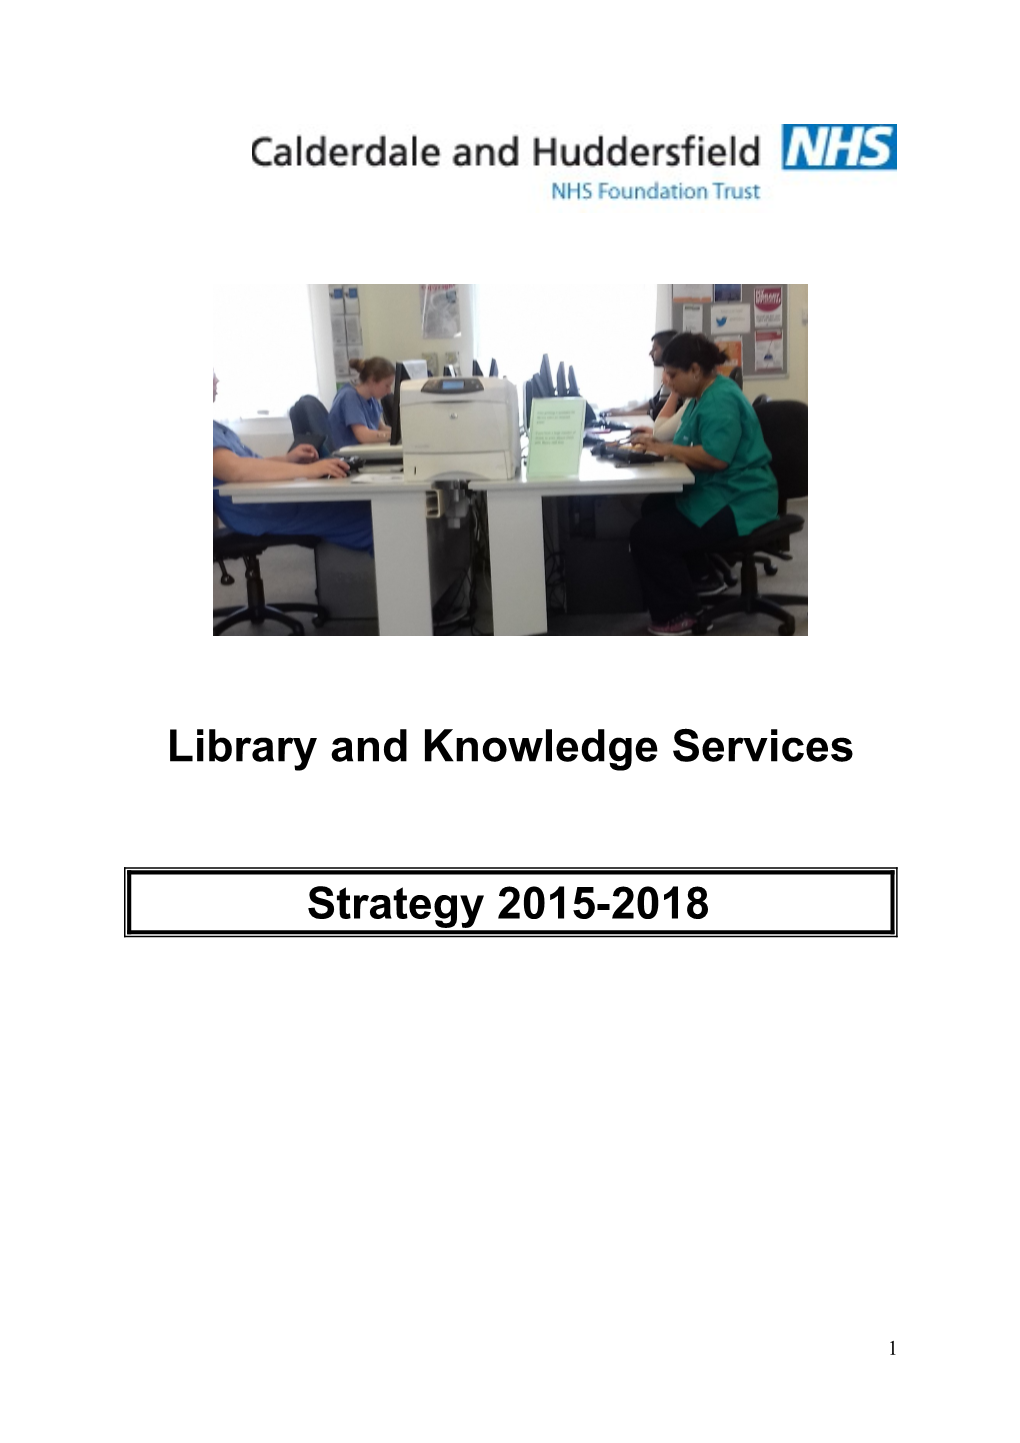 Library and Knowledge Services